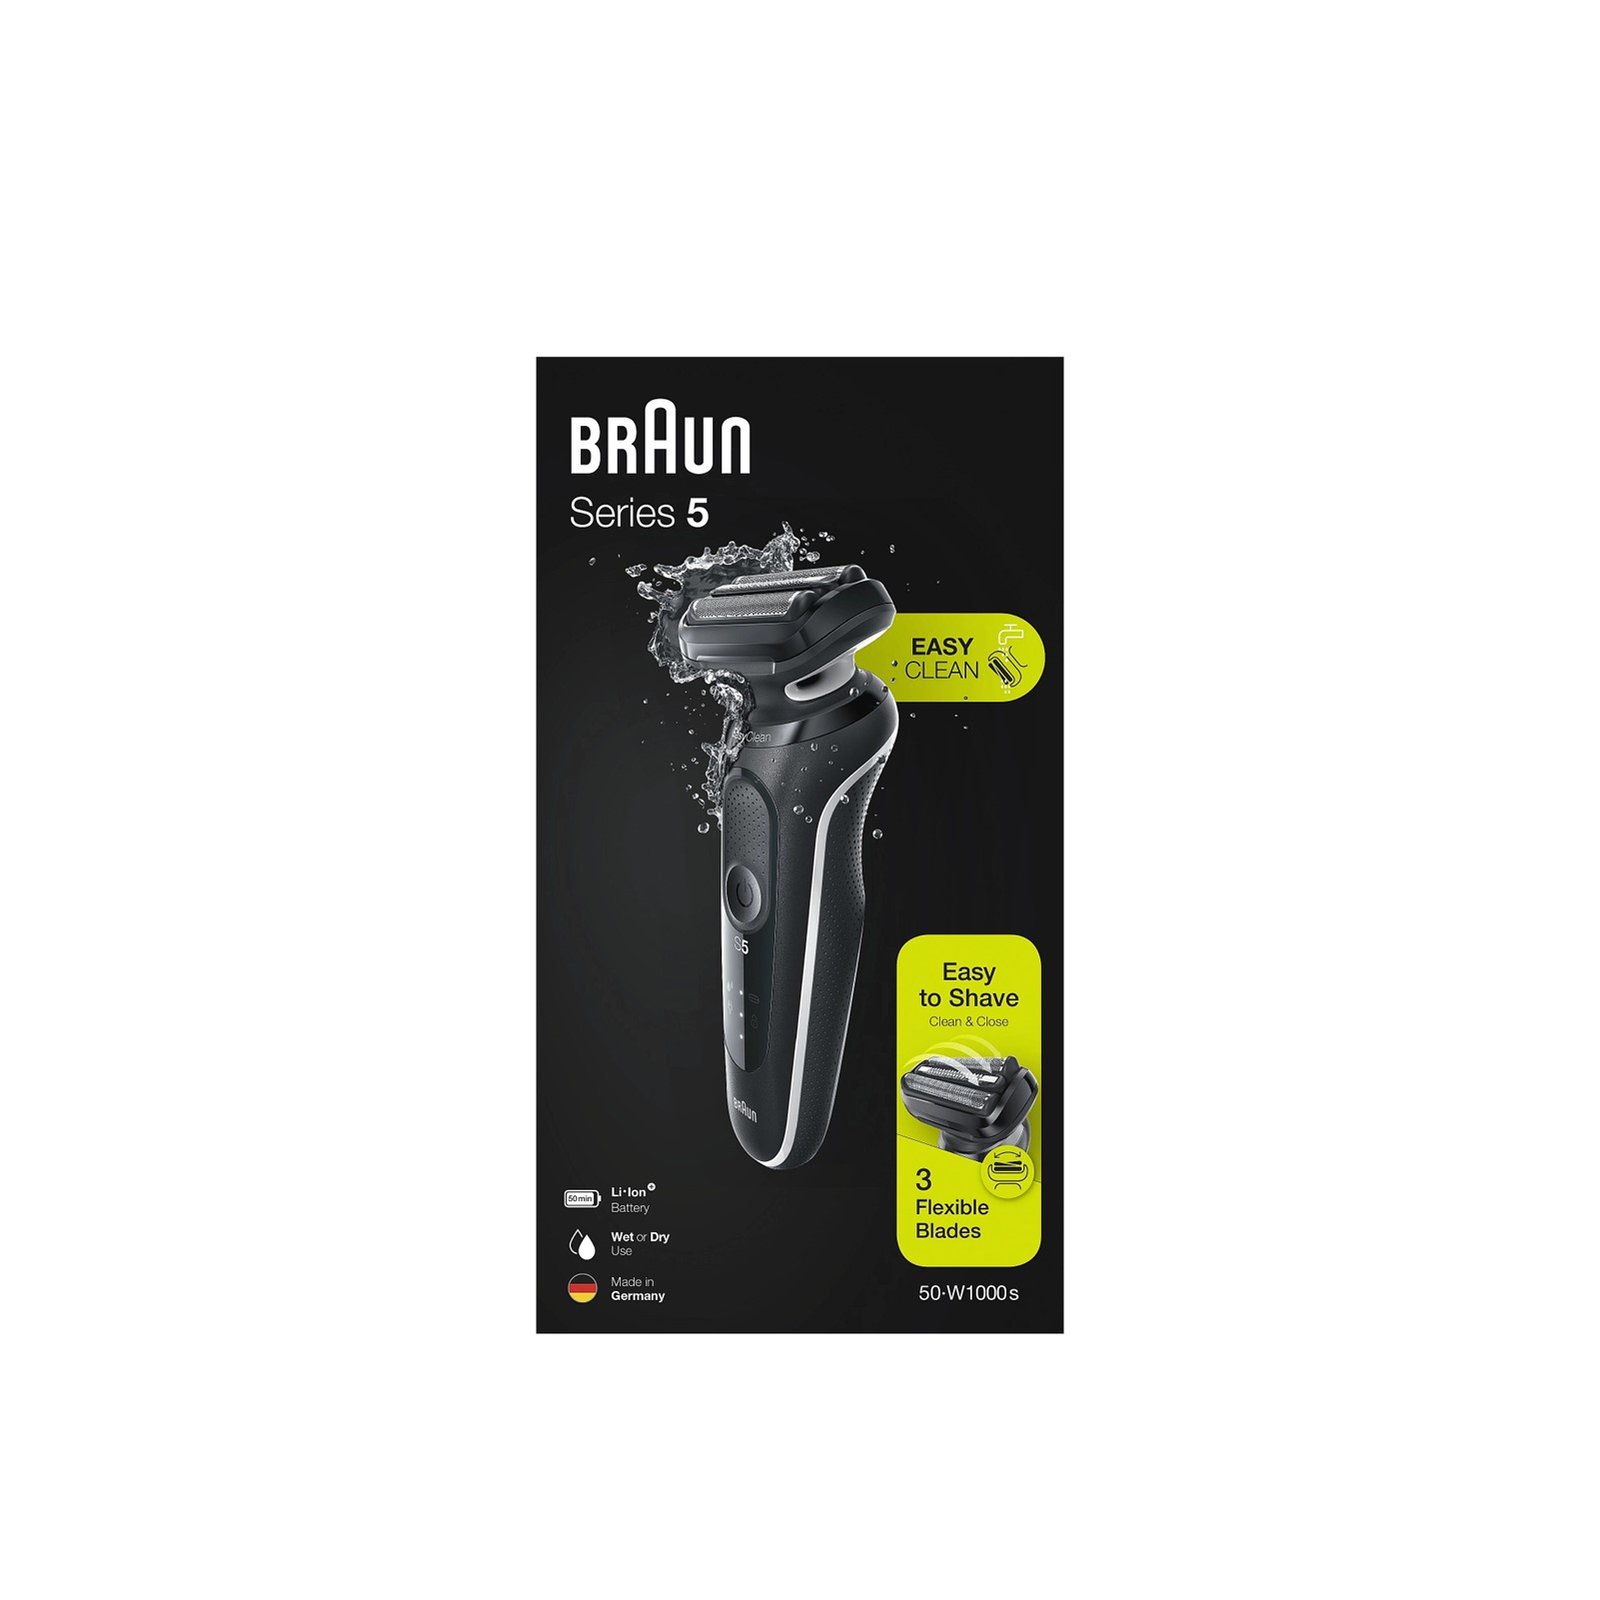 Buy Braun Series 5 EasyClean Electric Shaver 51 W1000 S · USA